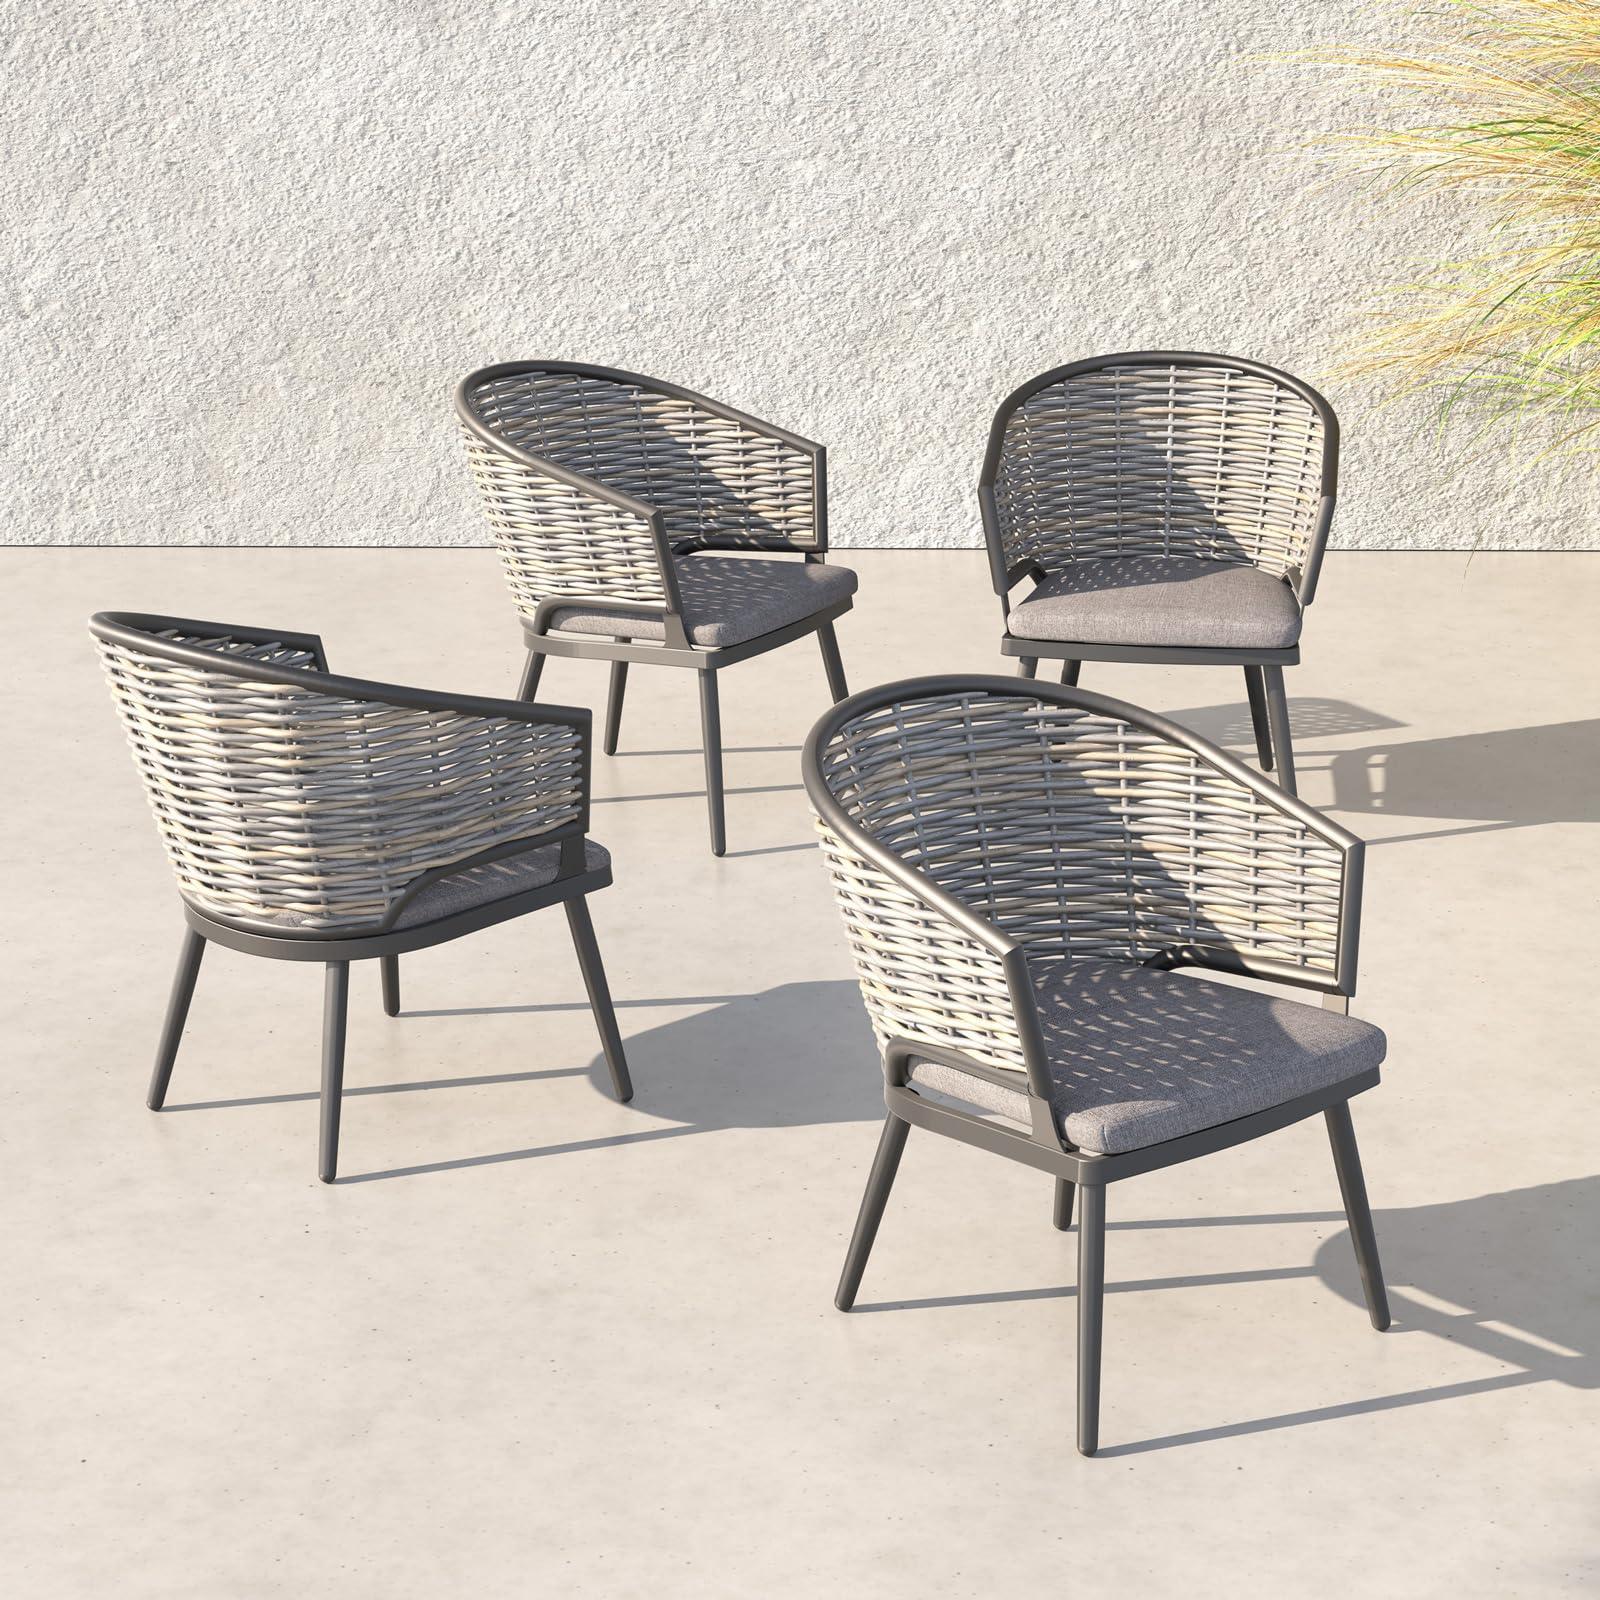 Burano Modern HDPE Wicker Outdoor Furniture, Grey wicker outdoor Dining chairs, aluminum frame, grey cushions, 4 chairs, in the sunshine - Jardina Furniture #Pieces_4-pc.